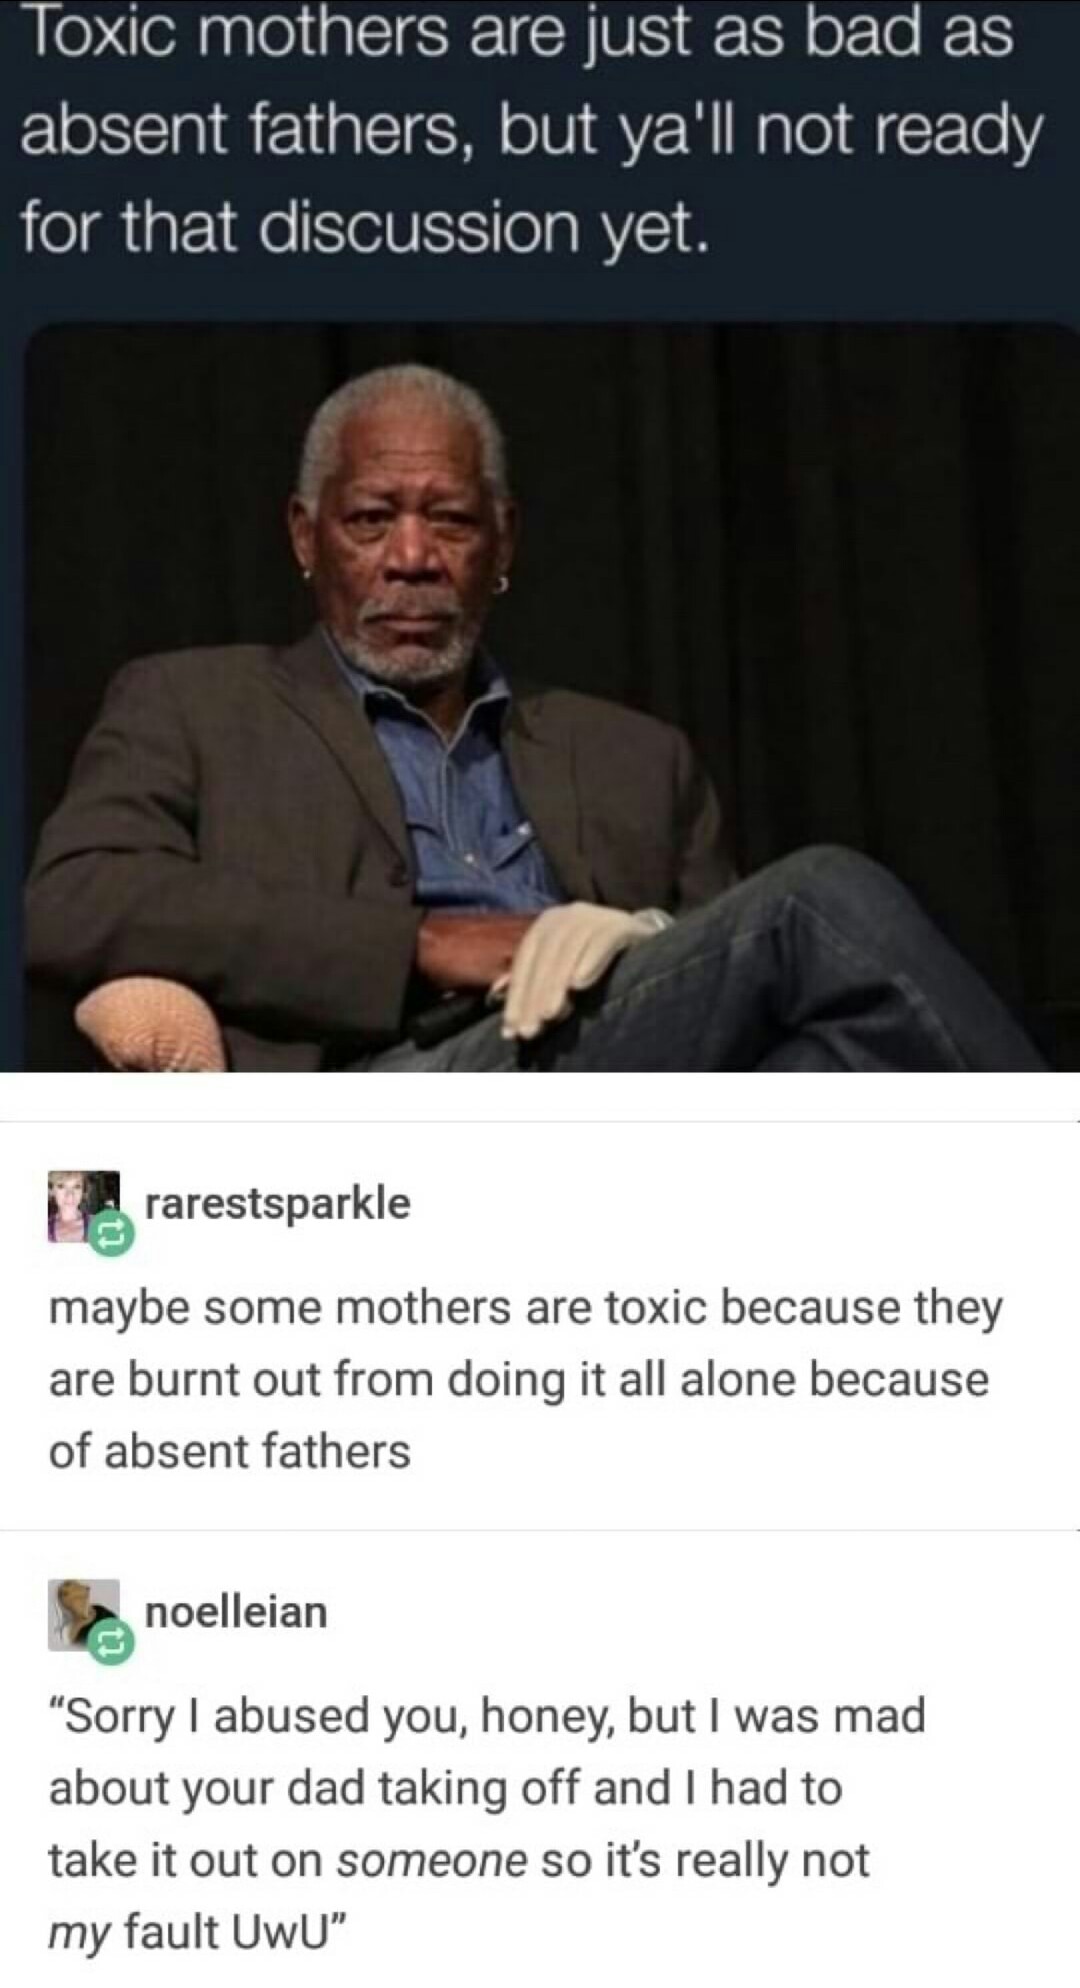 long distance relationship quotes - Toxic mothers are just as bad as absent fathers, but ya'll not ready for that discussion yet. rarestsparkle maybe some mothers are toxic because they are burnt out from doing it all alone because of absent fathers noell